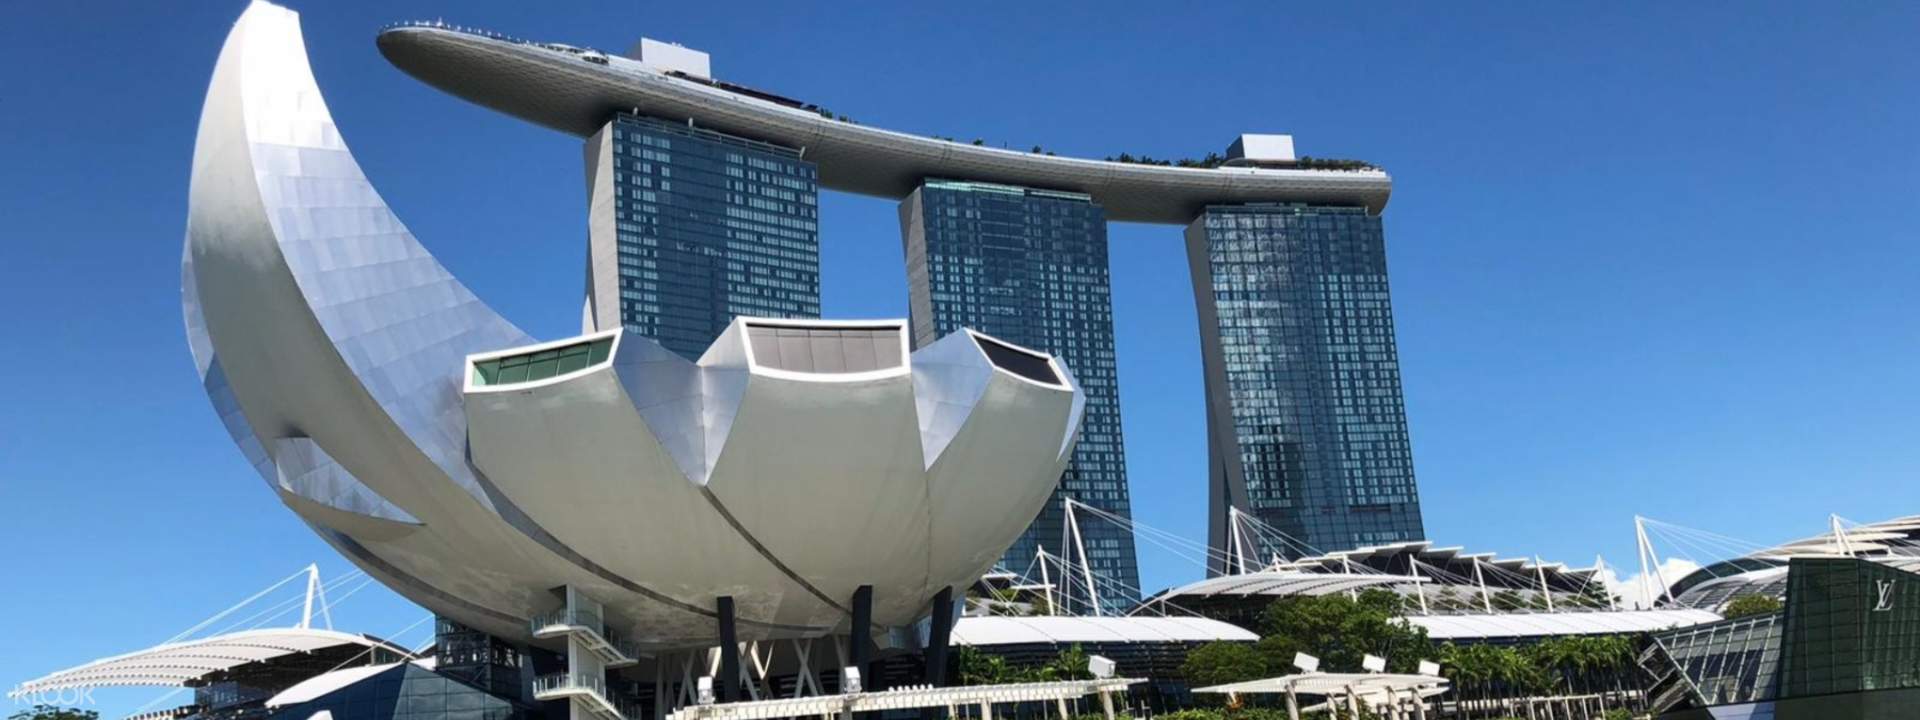 places to visit in singapore klook